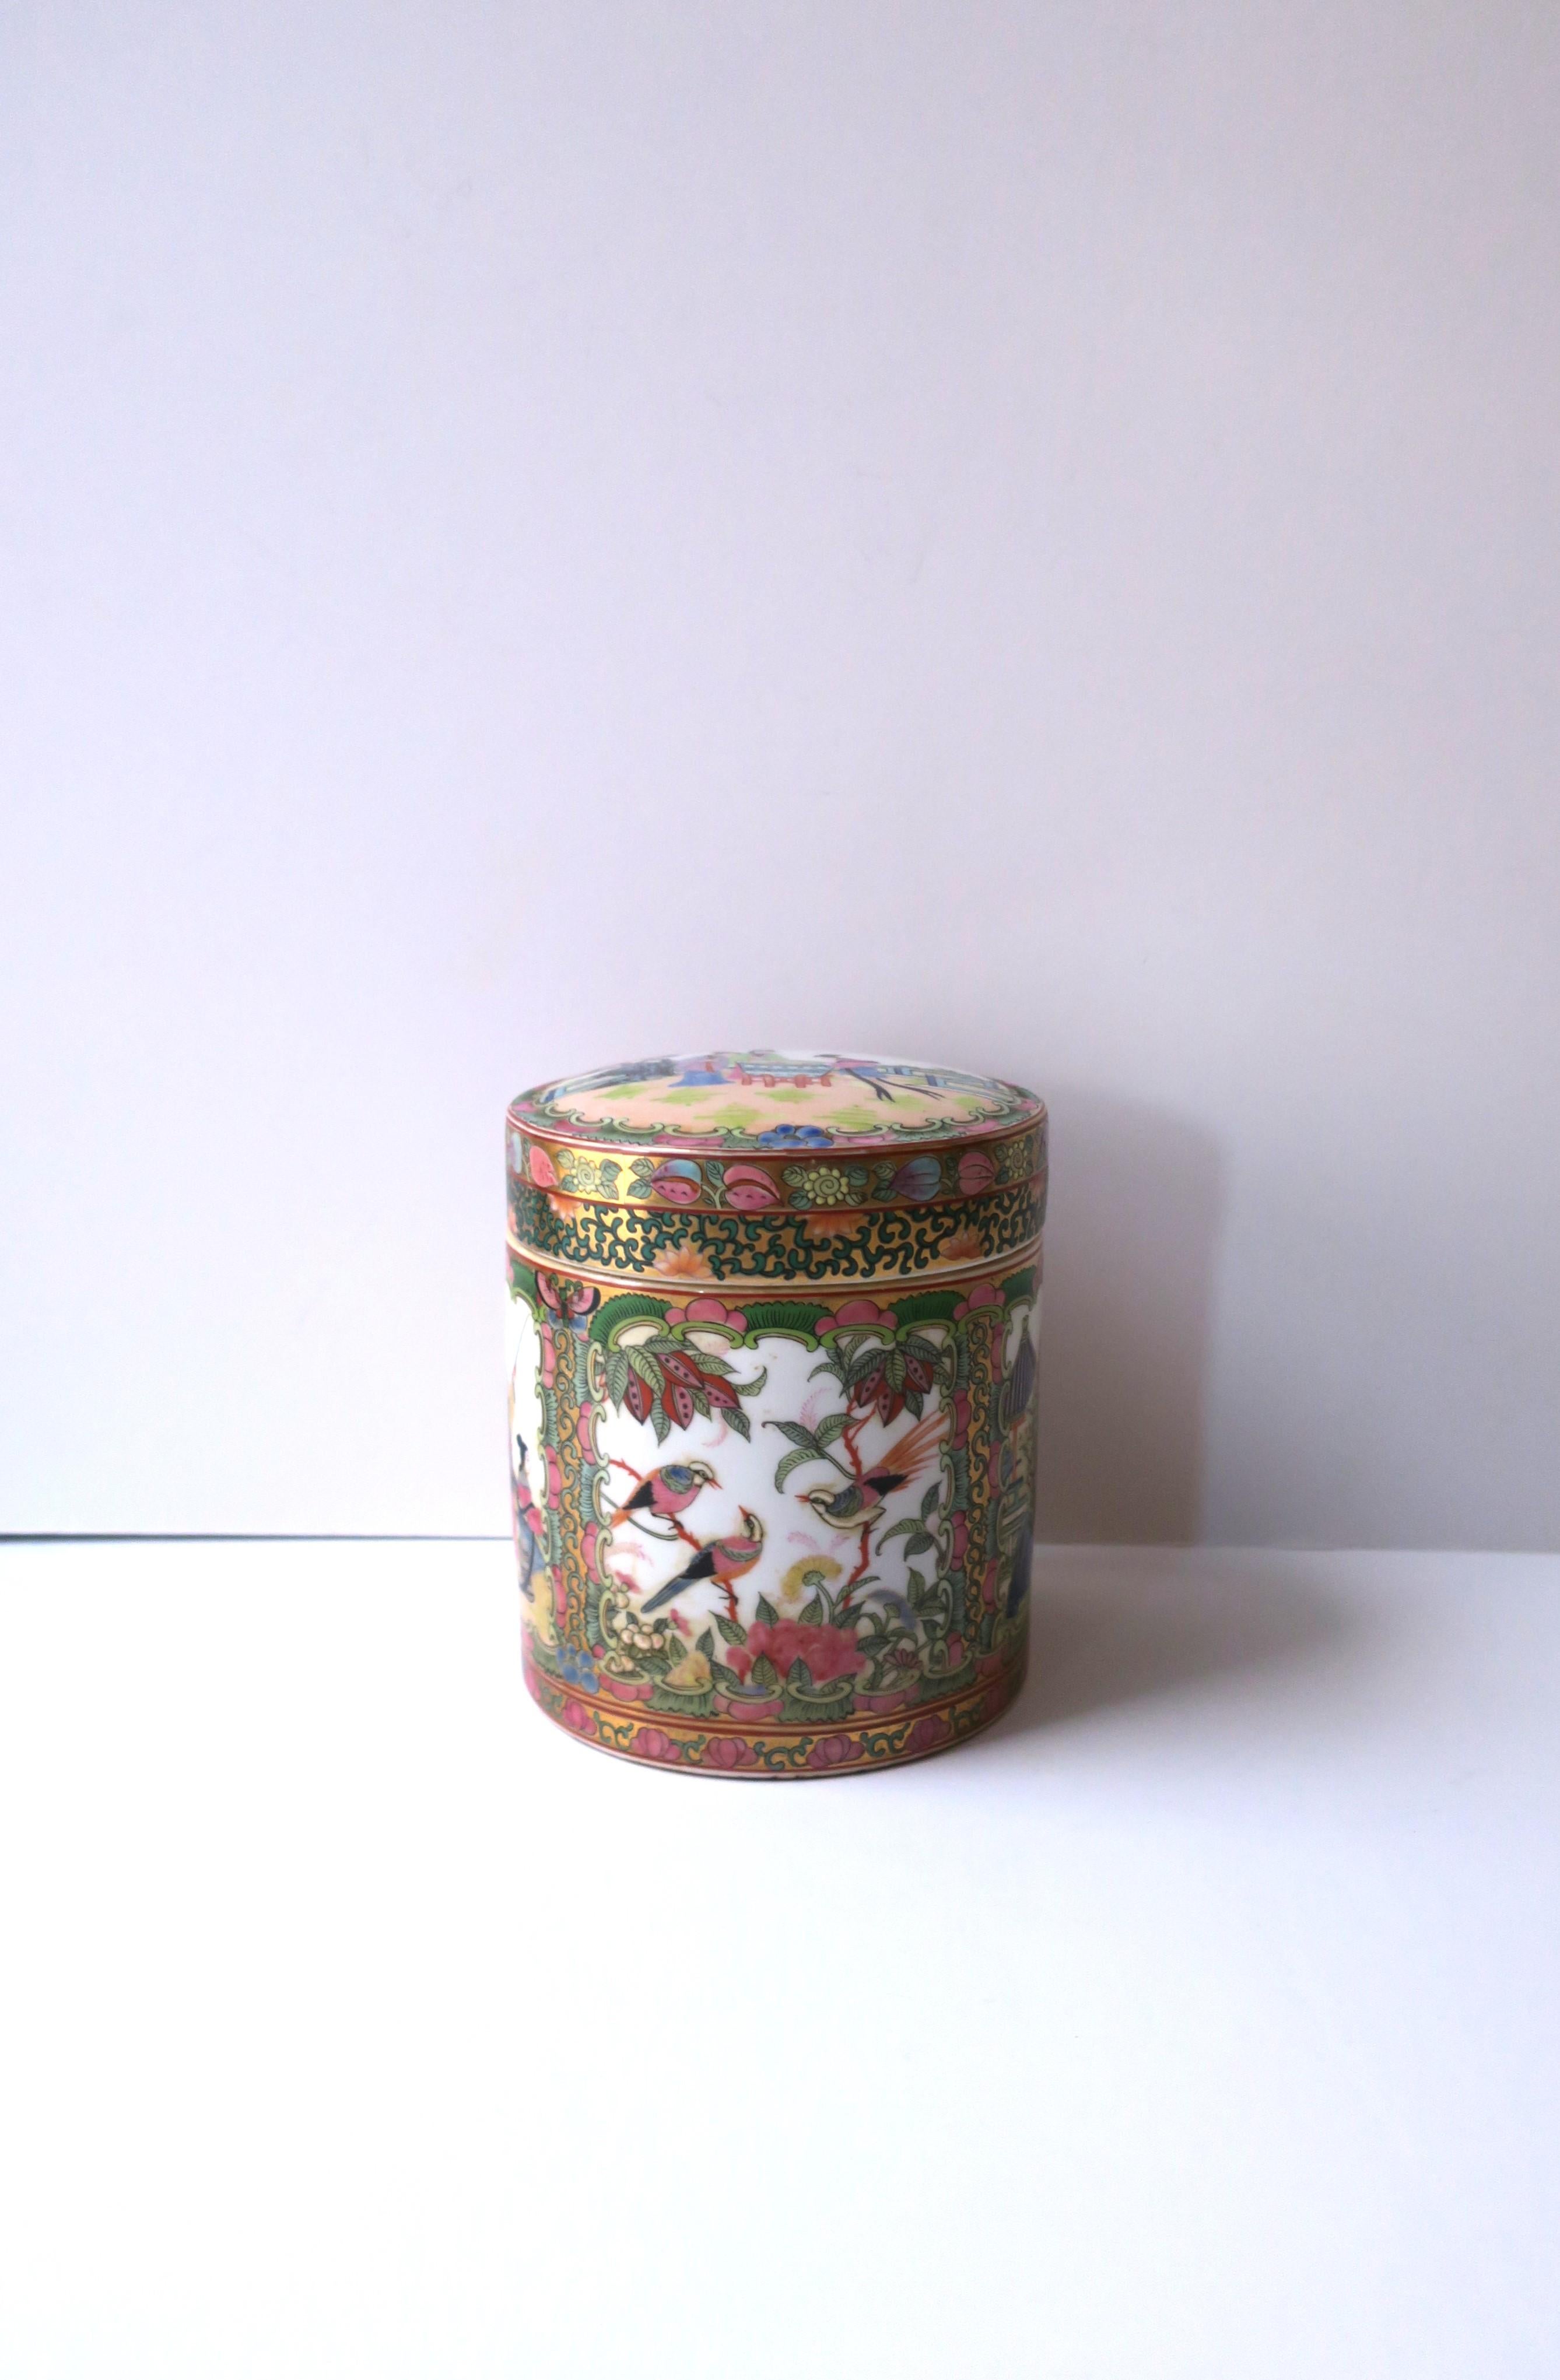 A beautiful vintage decorated Famille Rose ceramic decorative box, Chinese Export/Chinoiserie style, circa mid-20th century. Box and lid are beautiful decorated with figures and birds amidst flowers and leaves. Great as a standalone piece/decorative